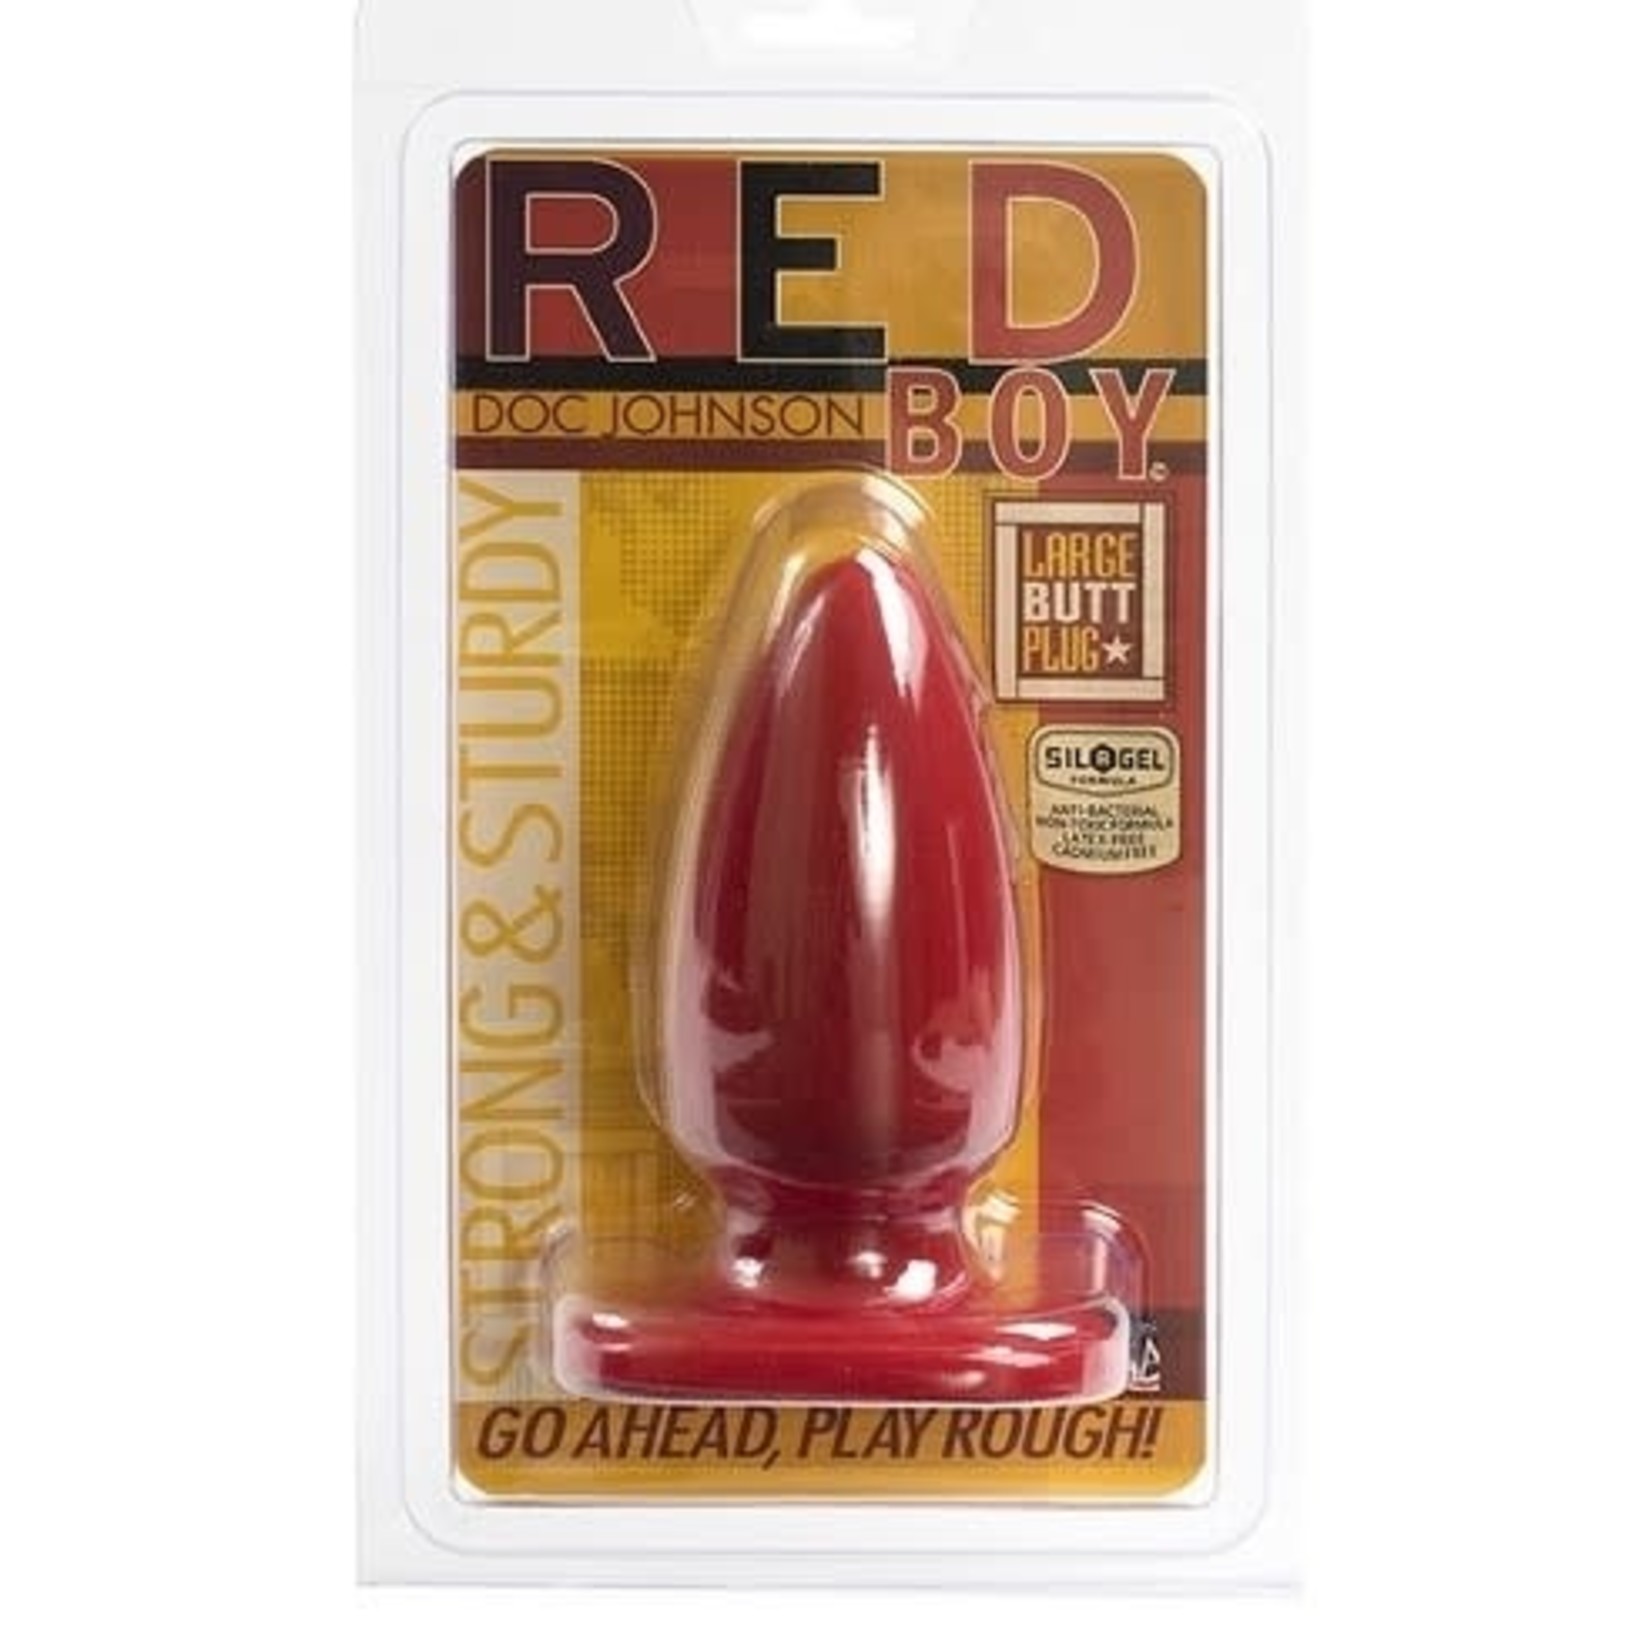 DOC JOHNSON RED BOY BUTT PLUG LARGE-RED